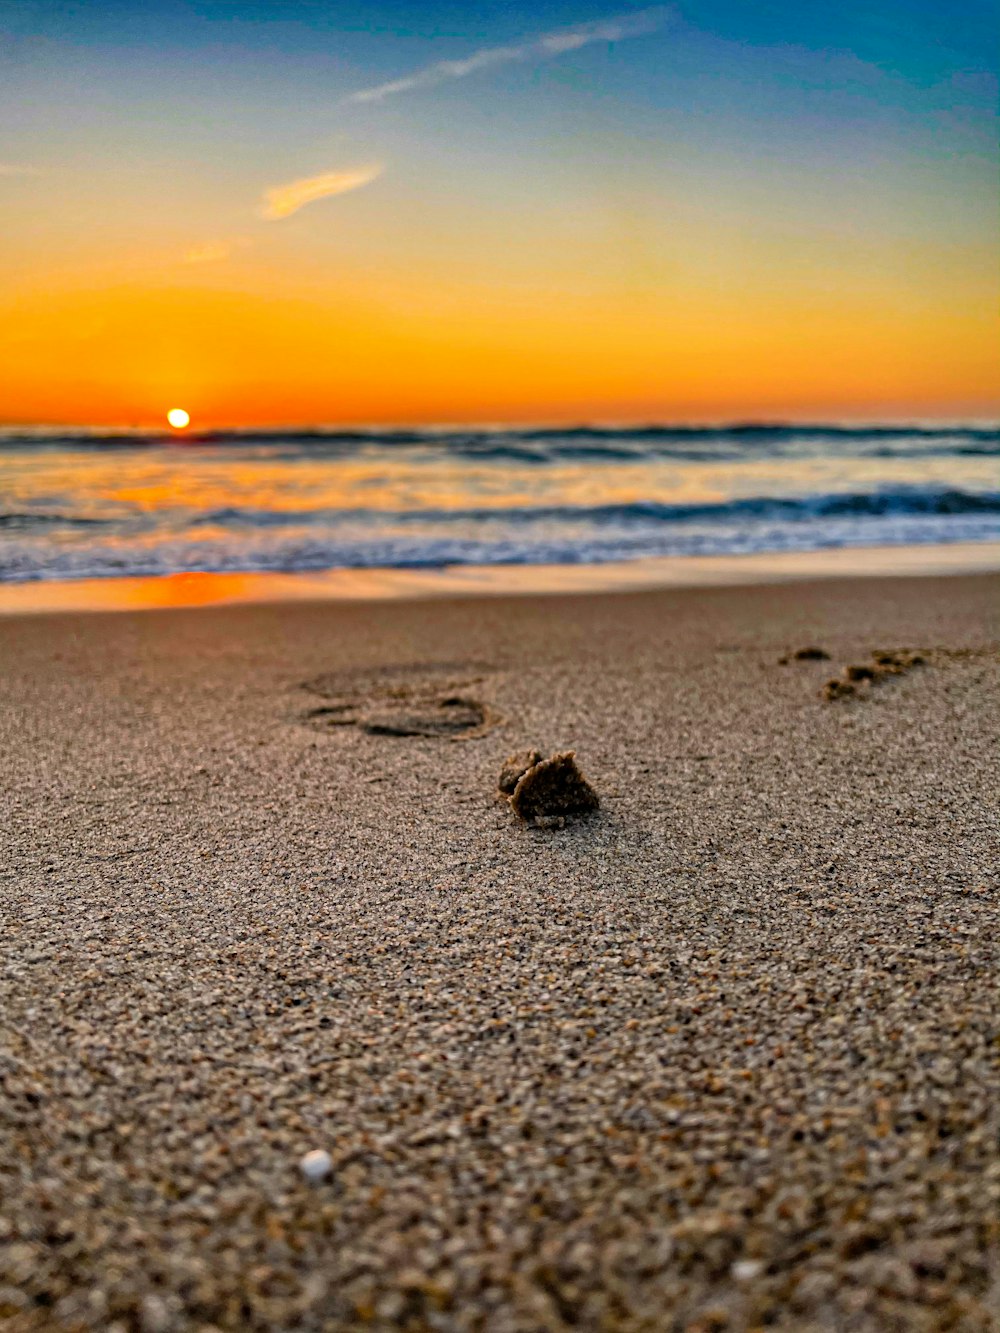 footprints in the sand of a beach at sunset